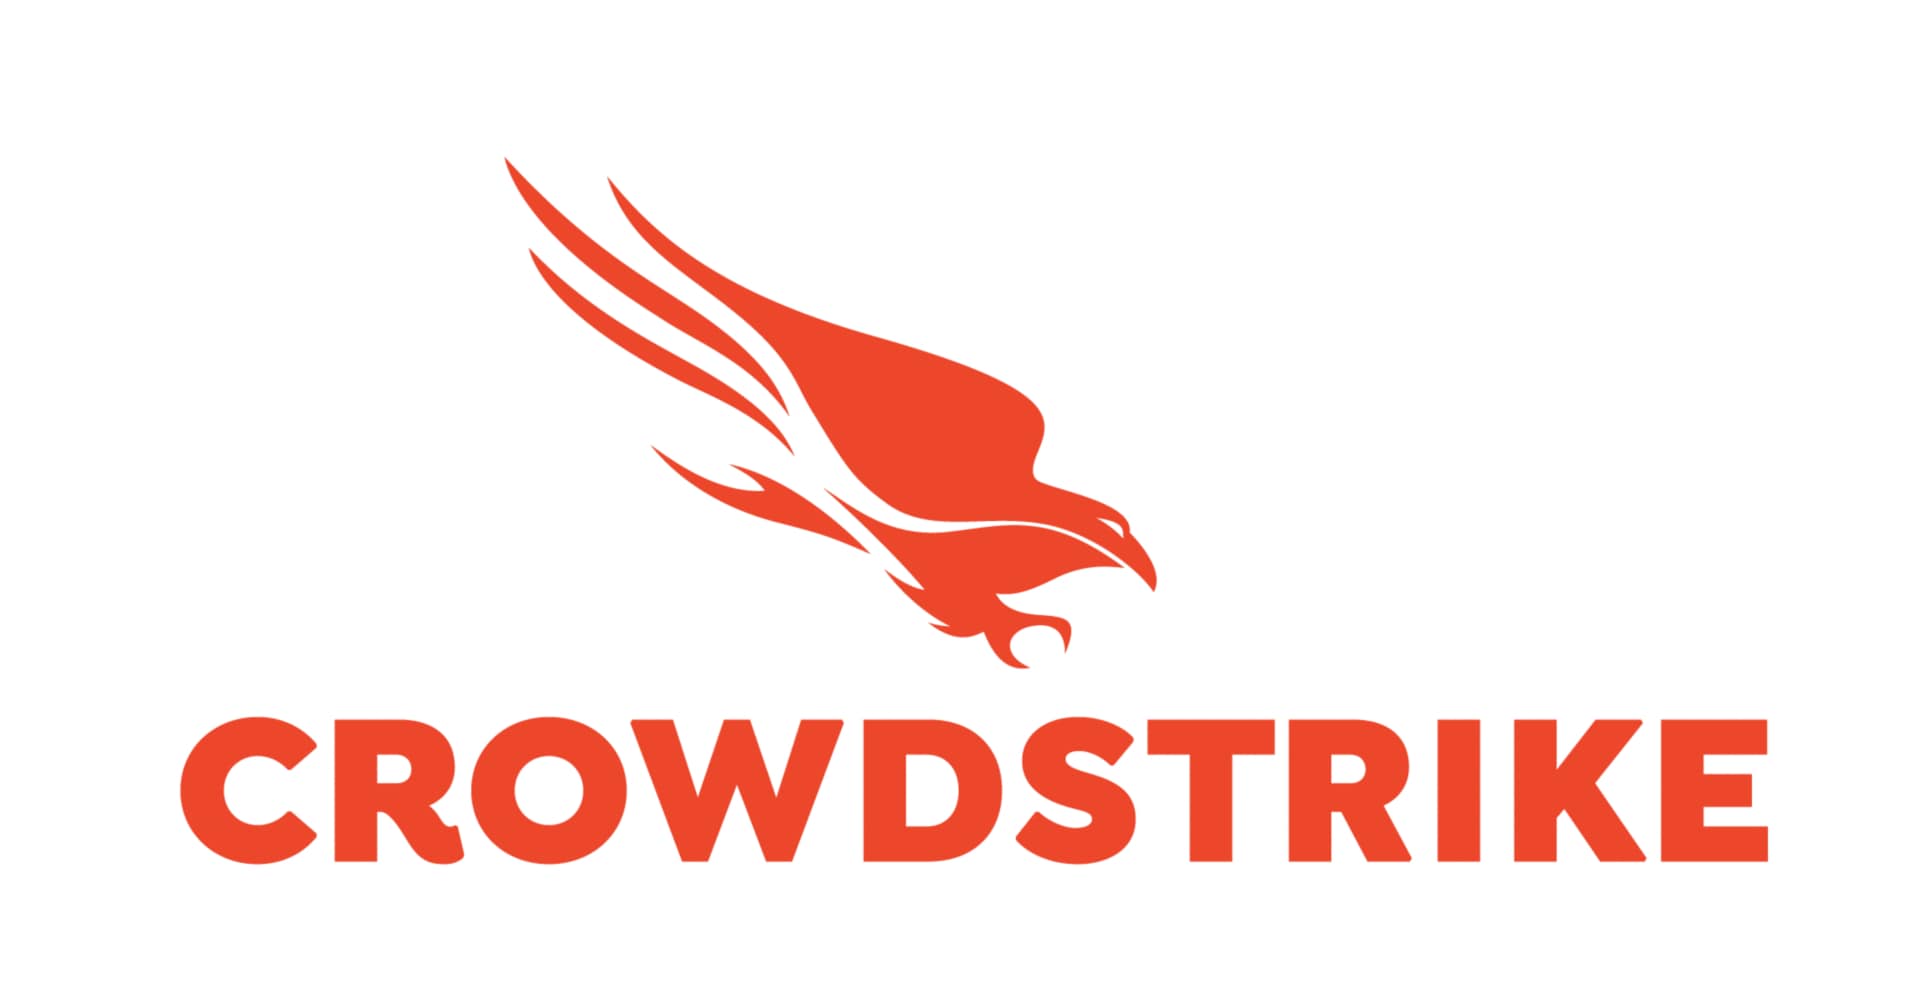 CrowdStrike 60-Month Express Support